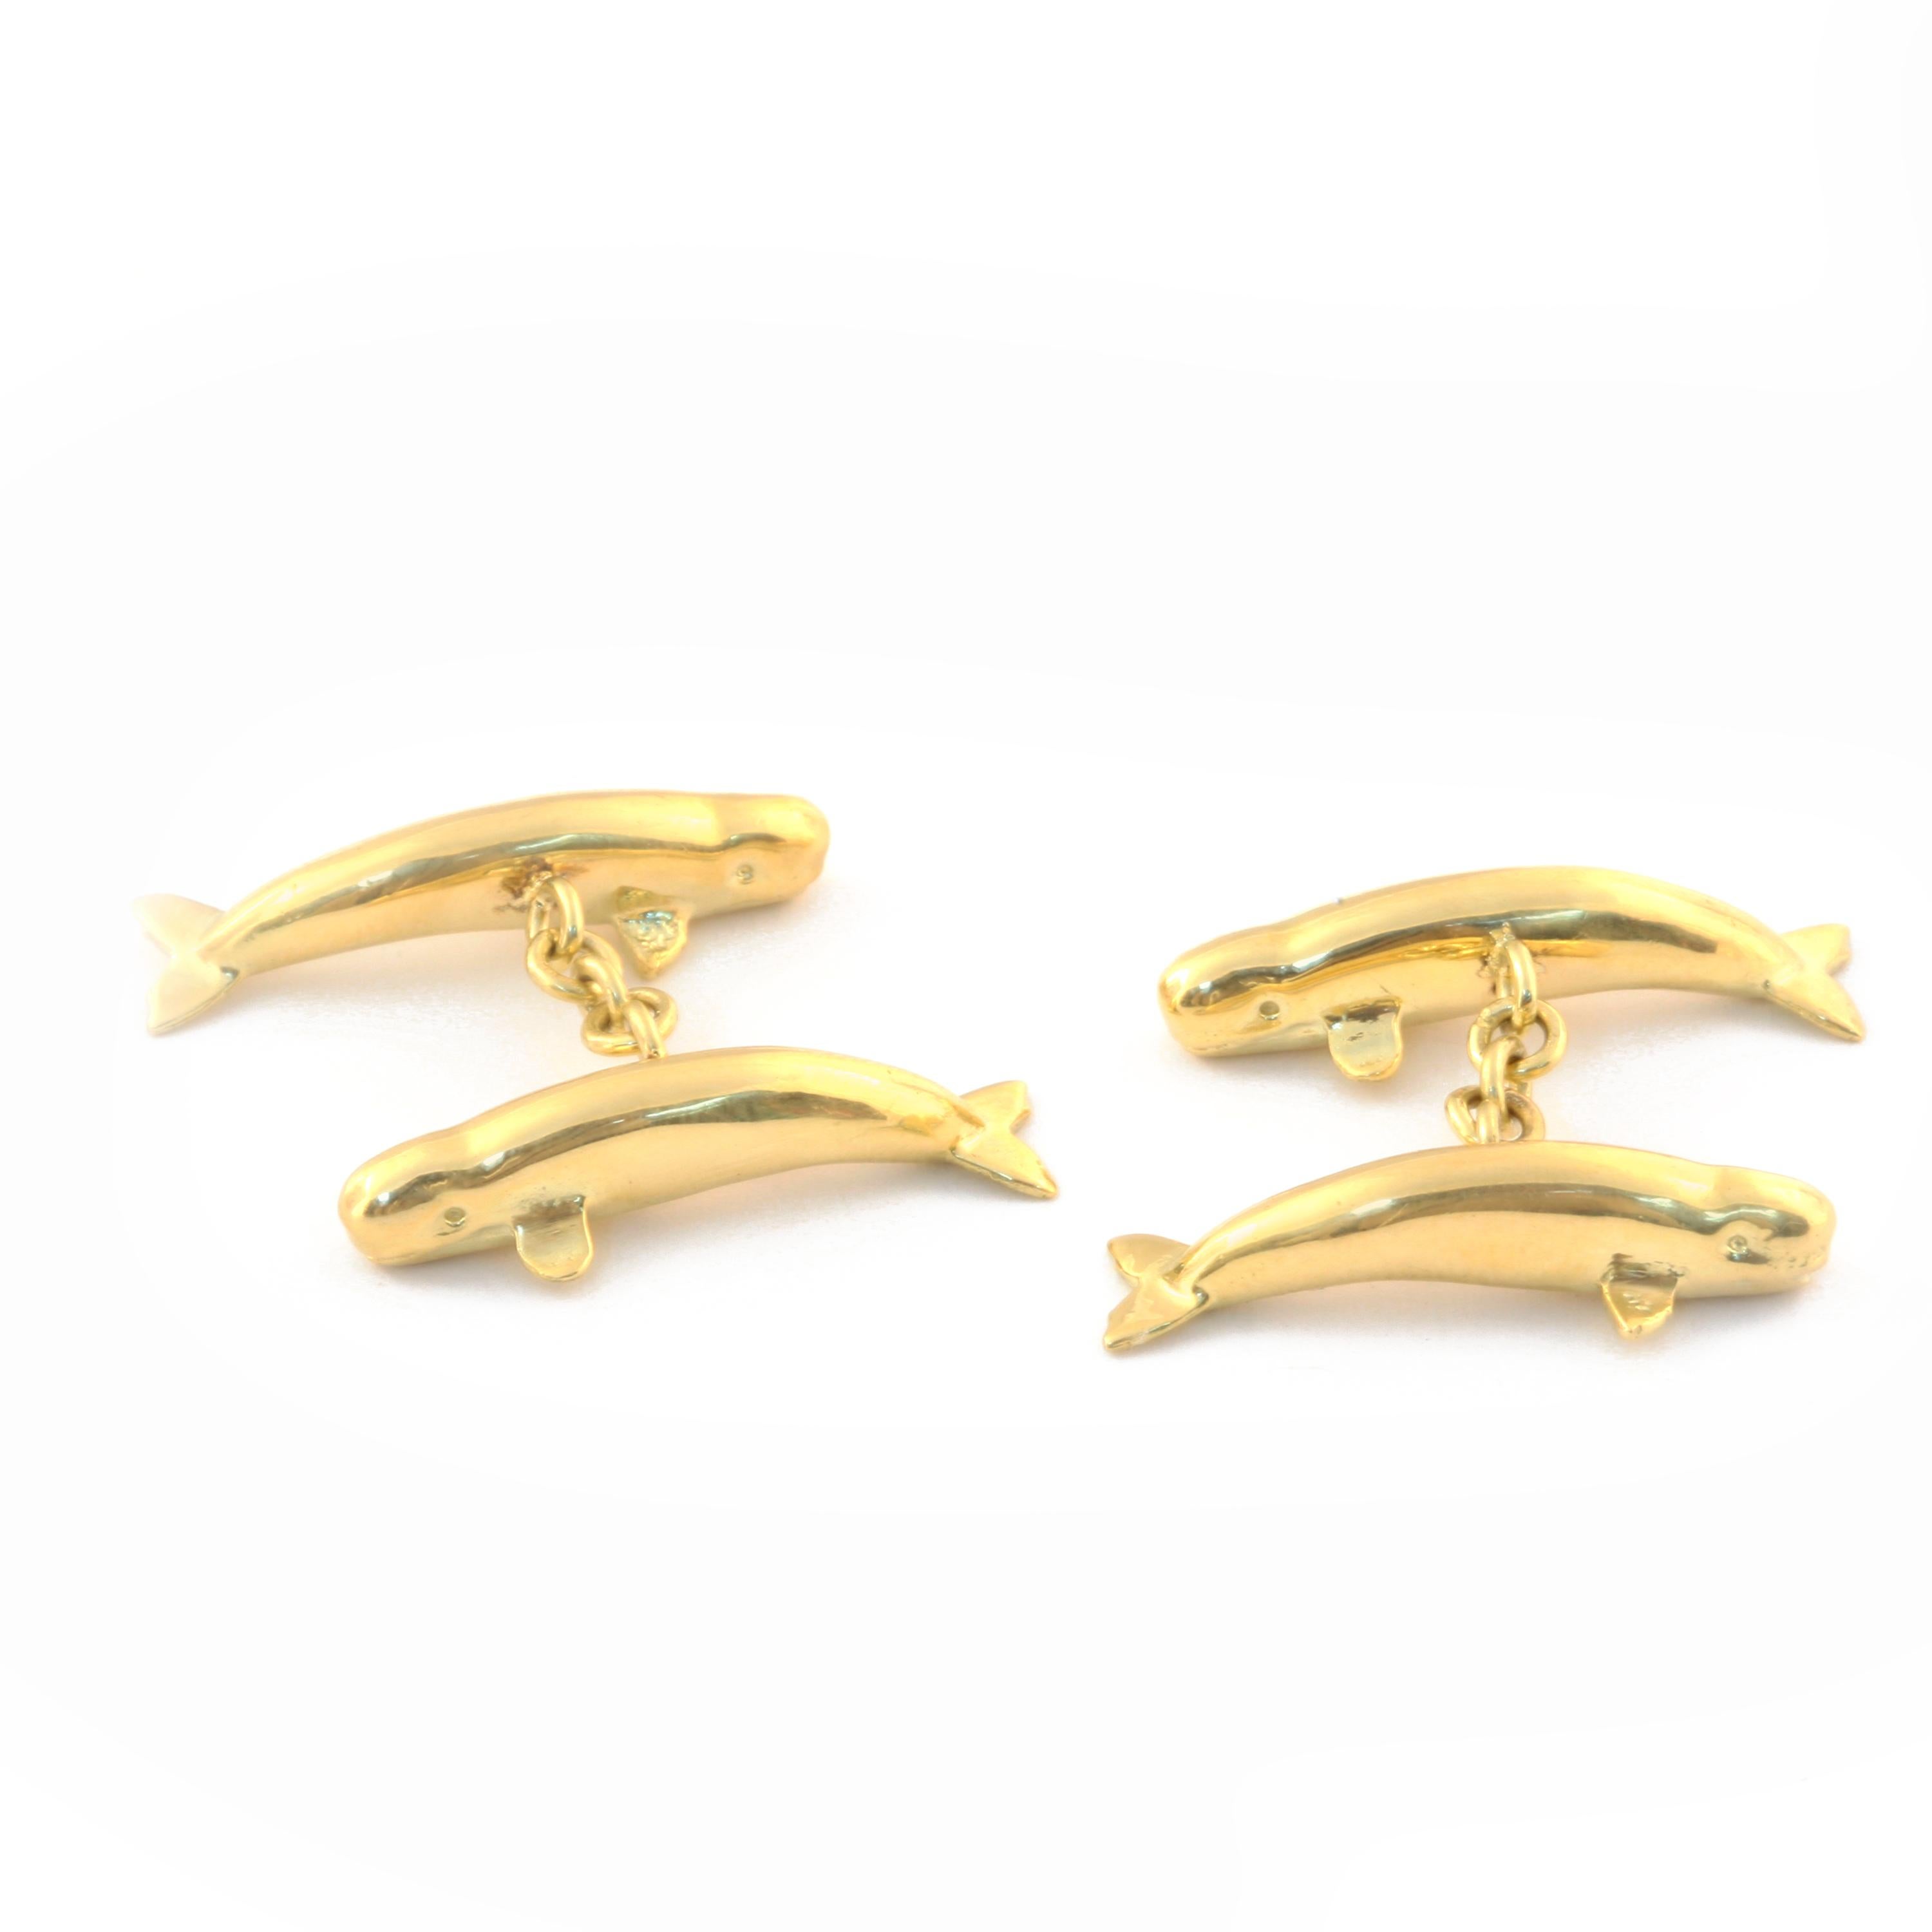    The substantial weight of these cuff-links is due to the lost wax casting process. Solid handmade chain links each pair of whales together. Fits French cuffs.
   The Sperm Whale was most sought after during the whaling industry. The name sperm